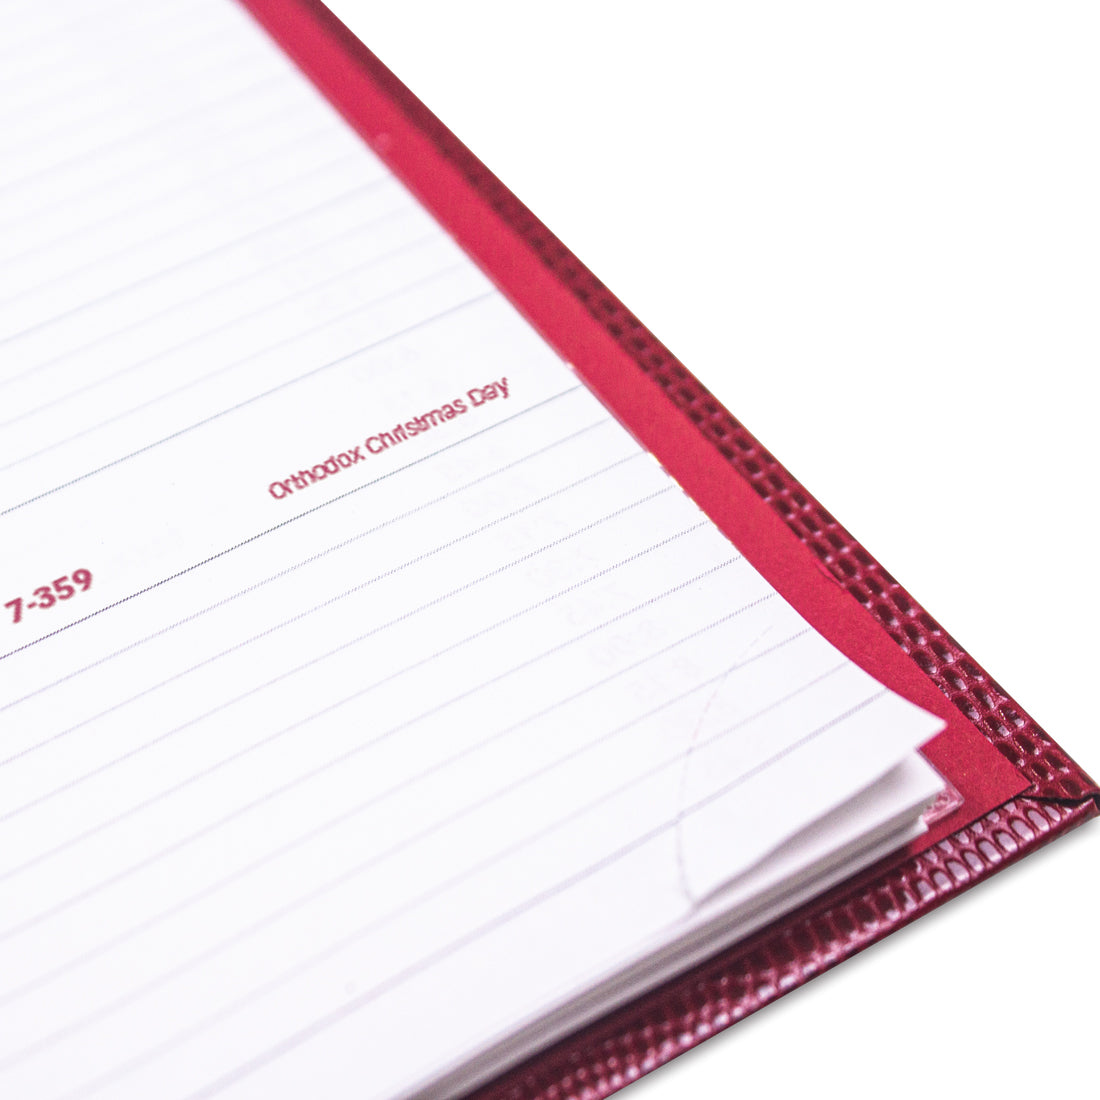 CoilPro Weekly Appointment Book 2024#color_red